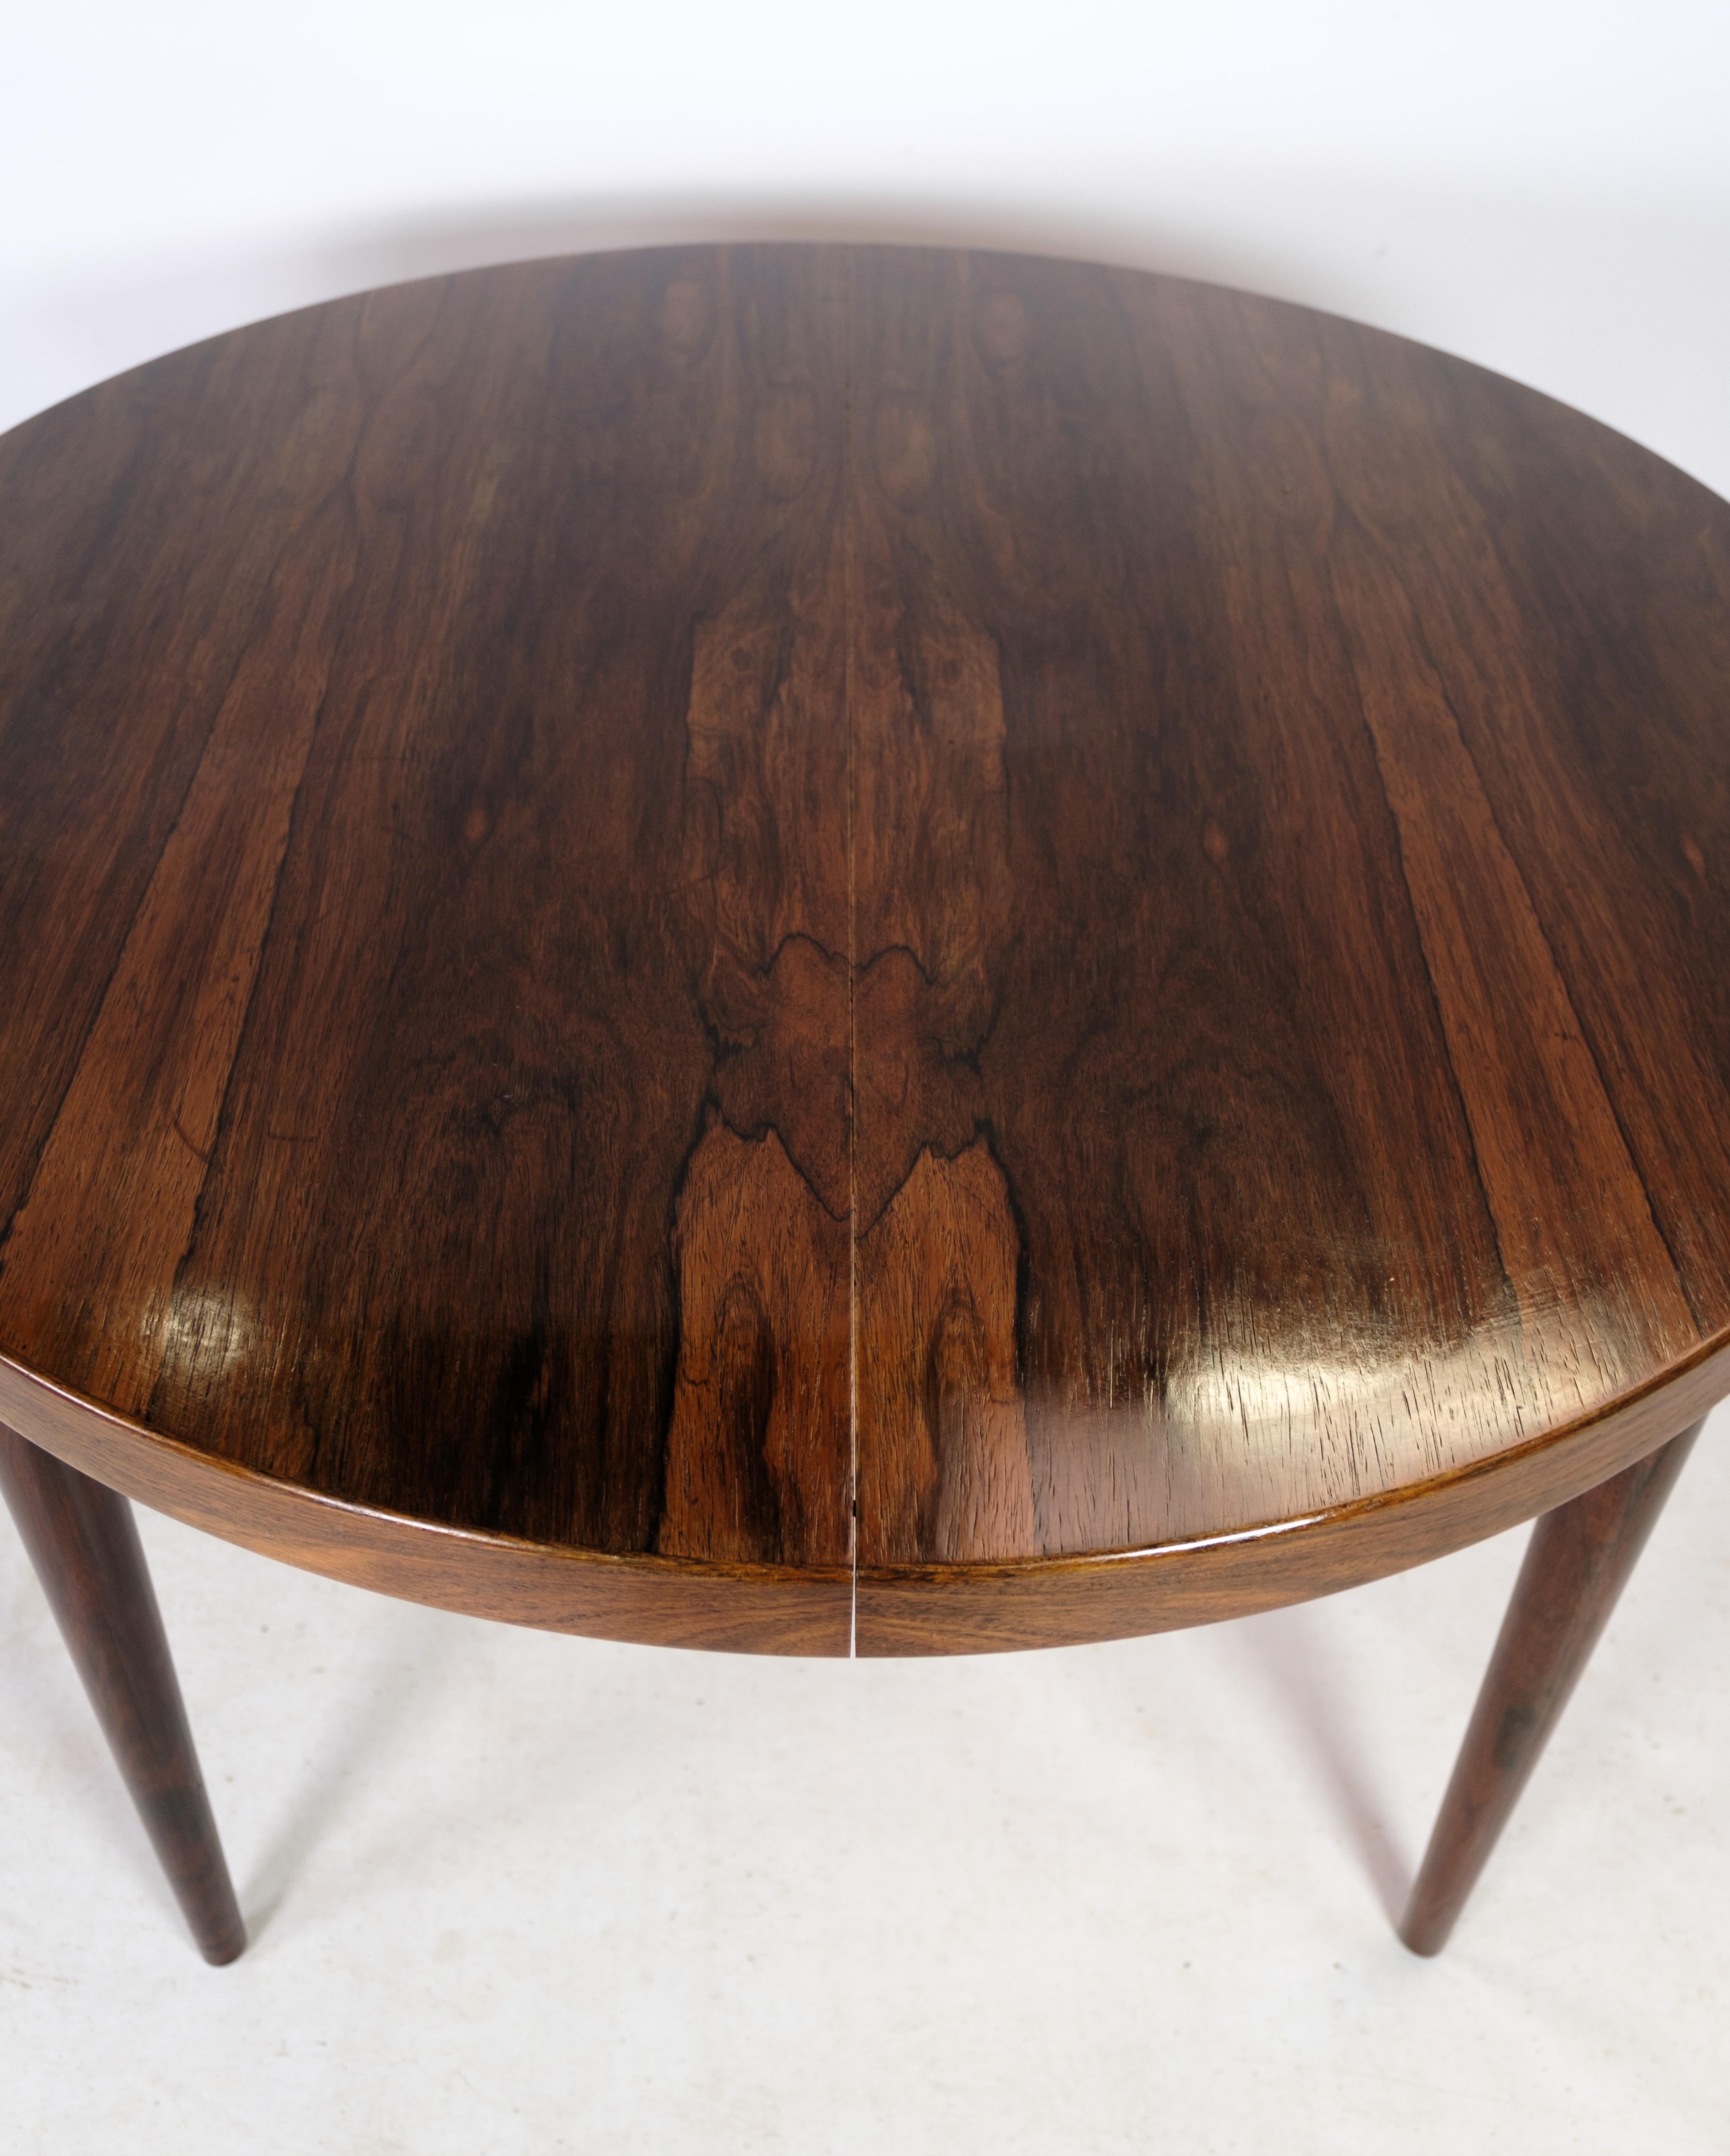 Abalone Round Dining Table, Rosewood, Omann Junior, Danish Design, 1960 For Sale